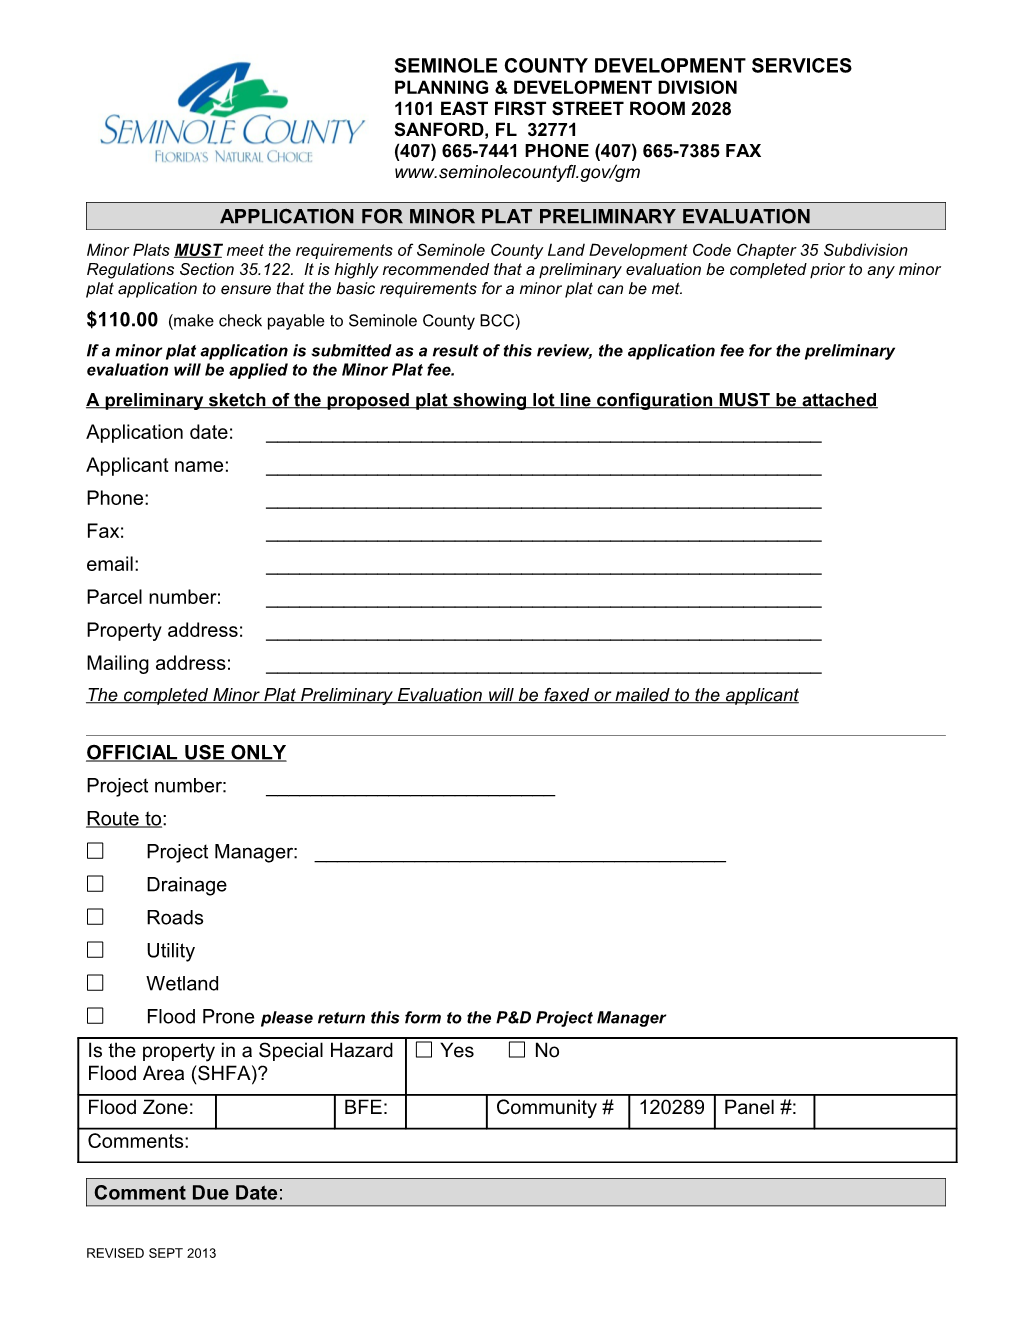 Application for Minor Plat Preliminary Evaluation